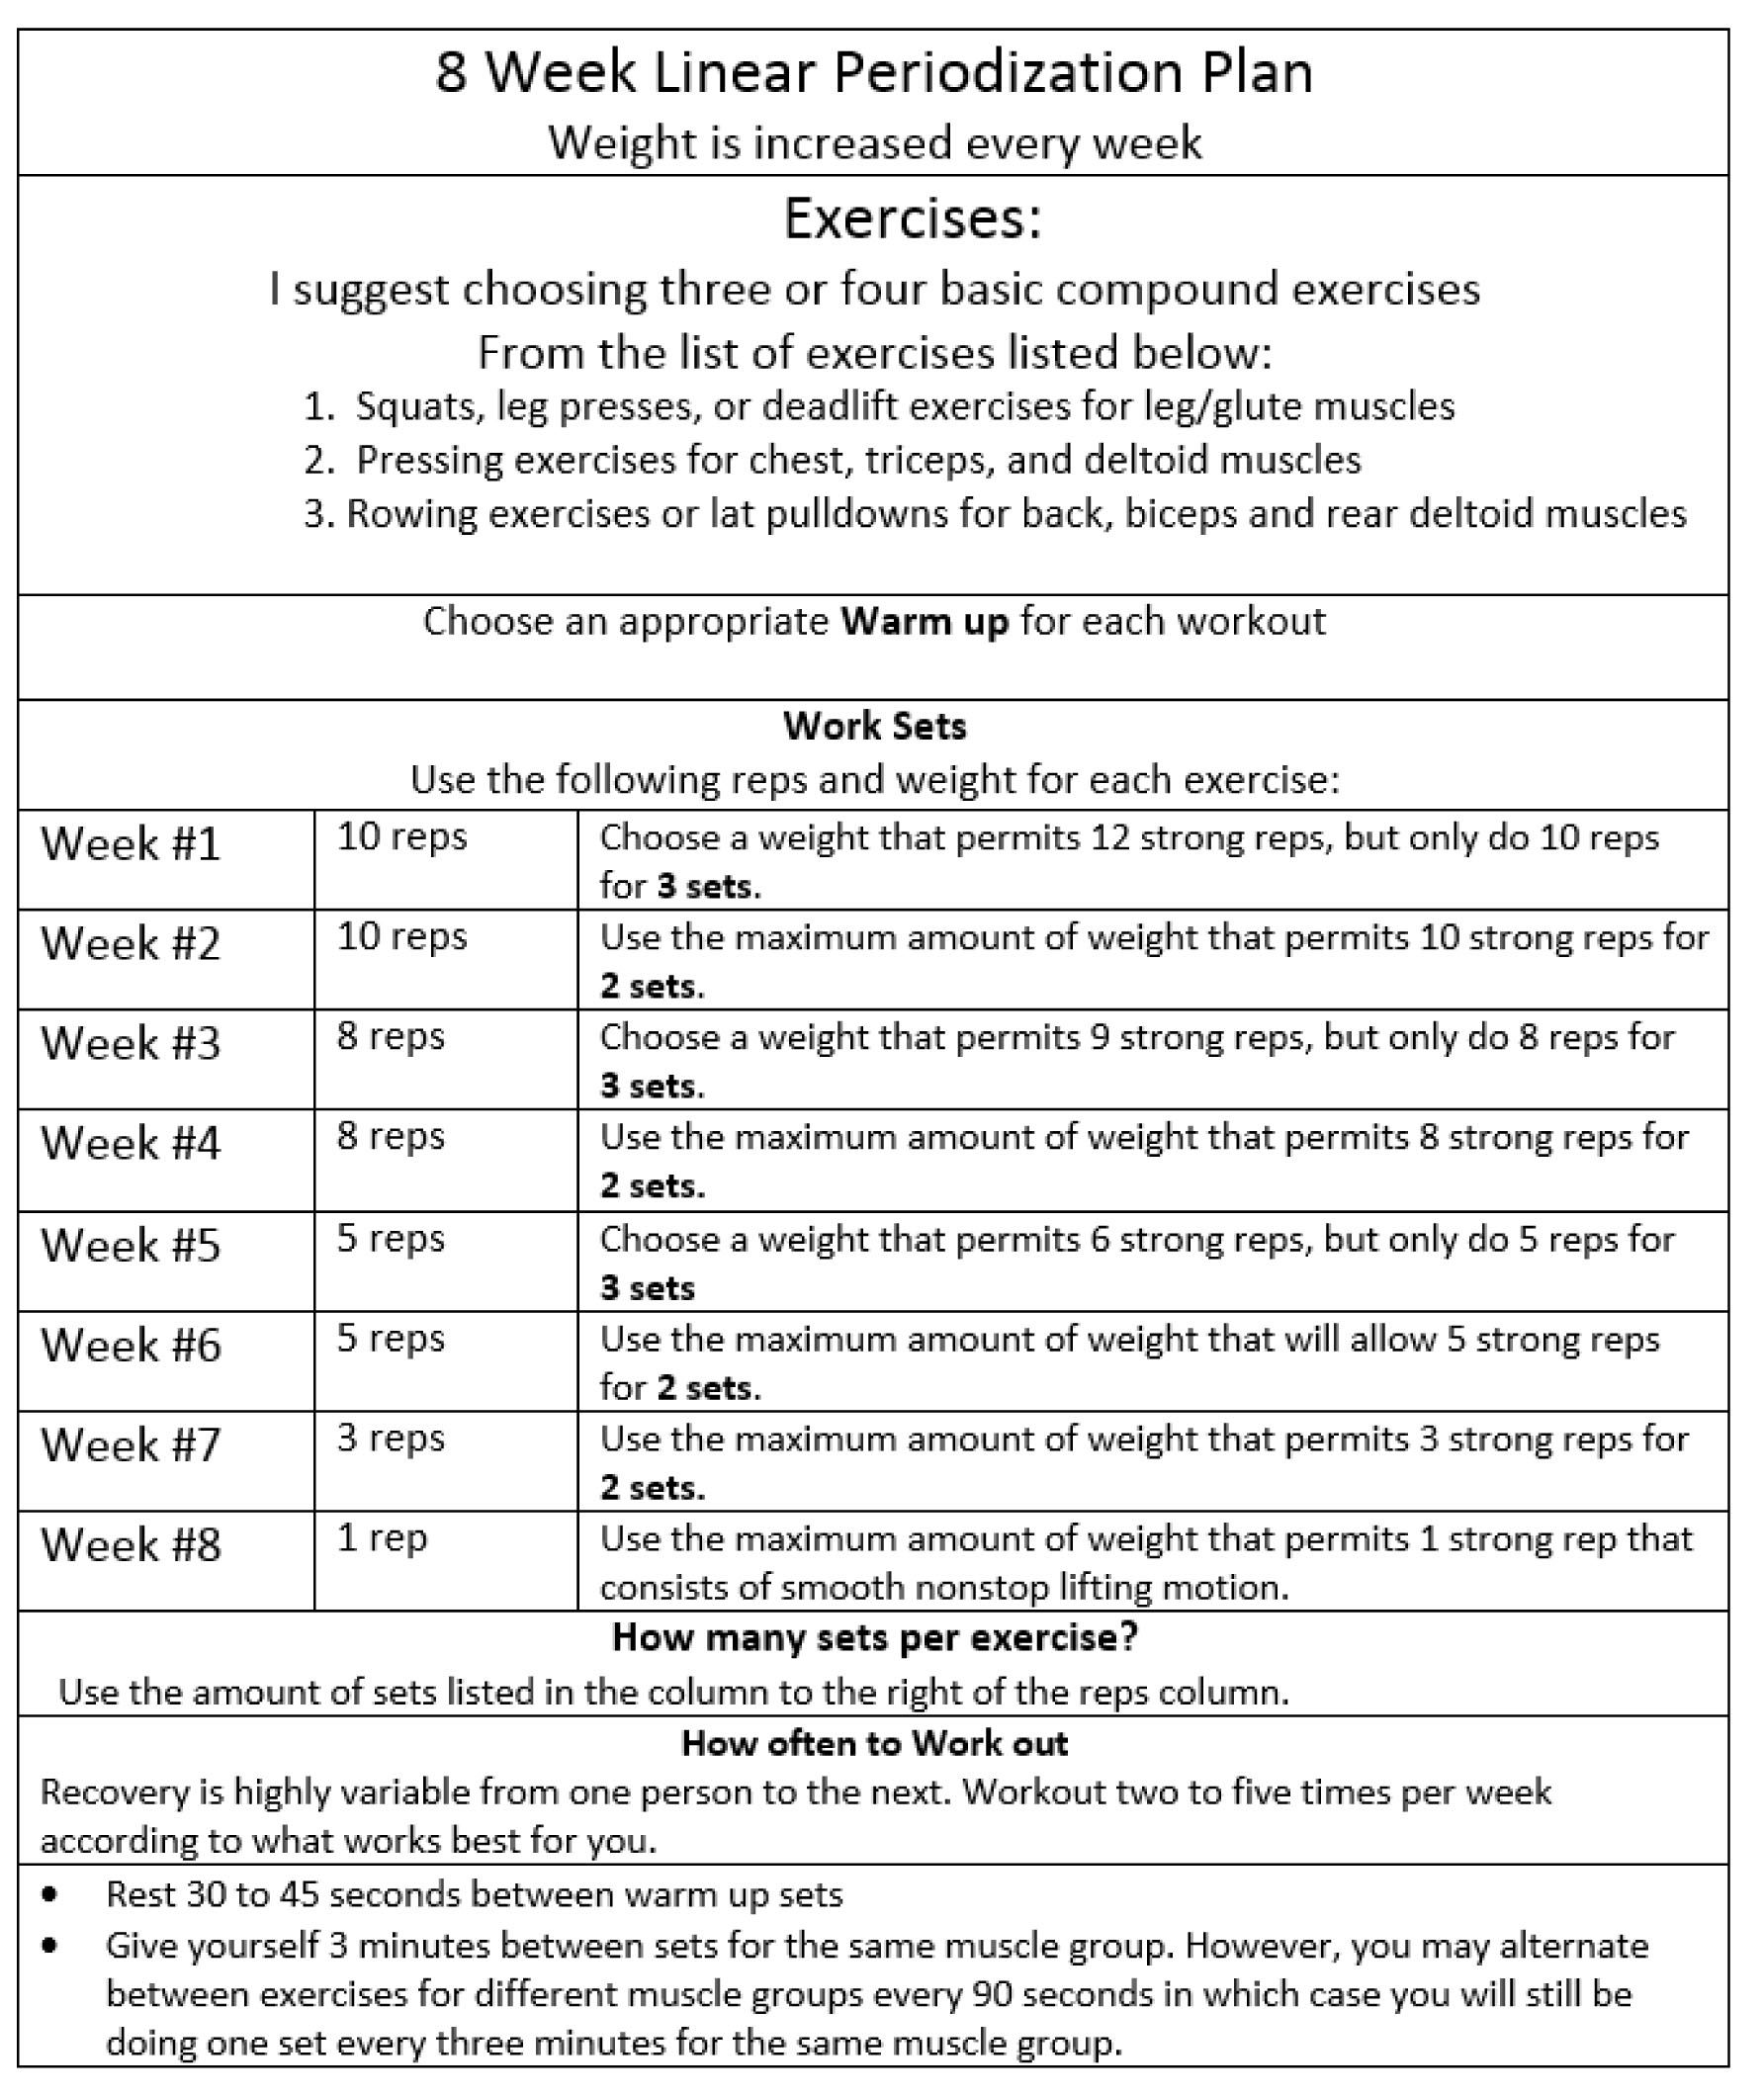 6 Day Linear Workout Program for Burn Fat fast